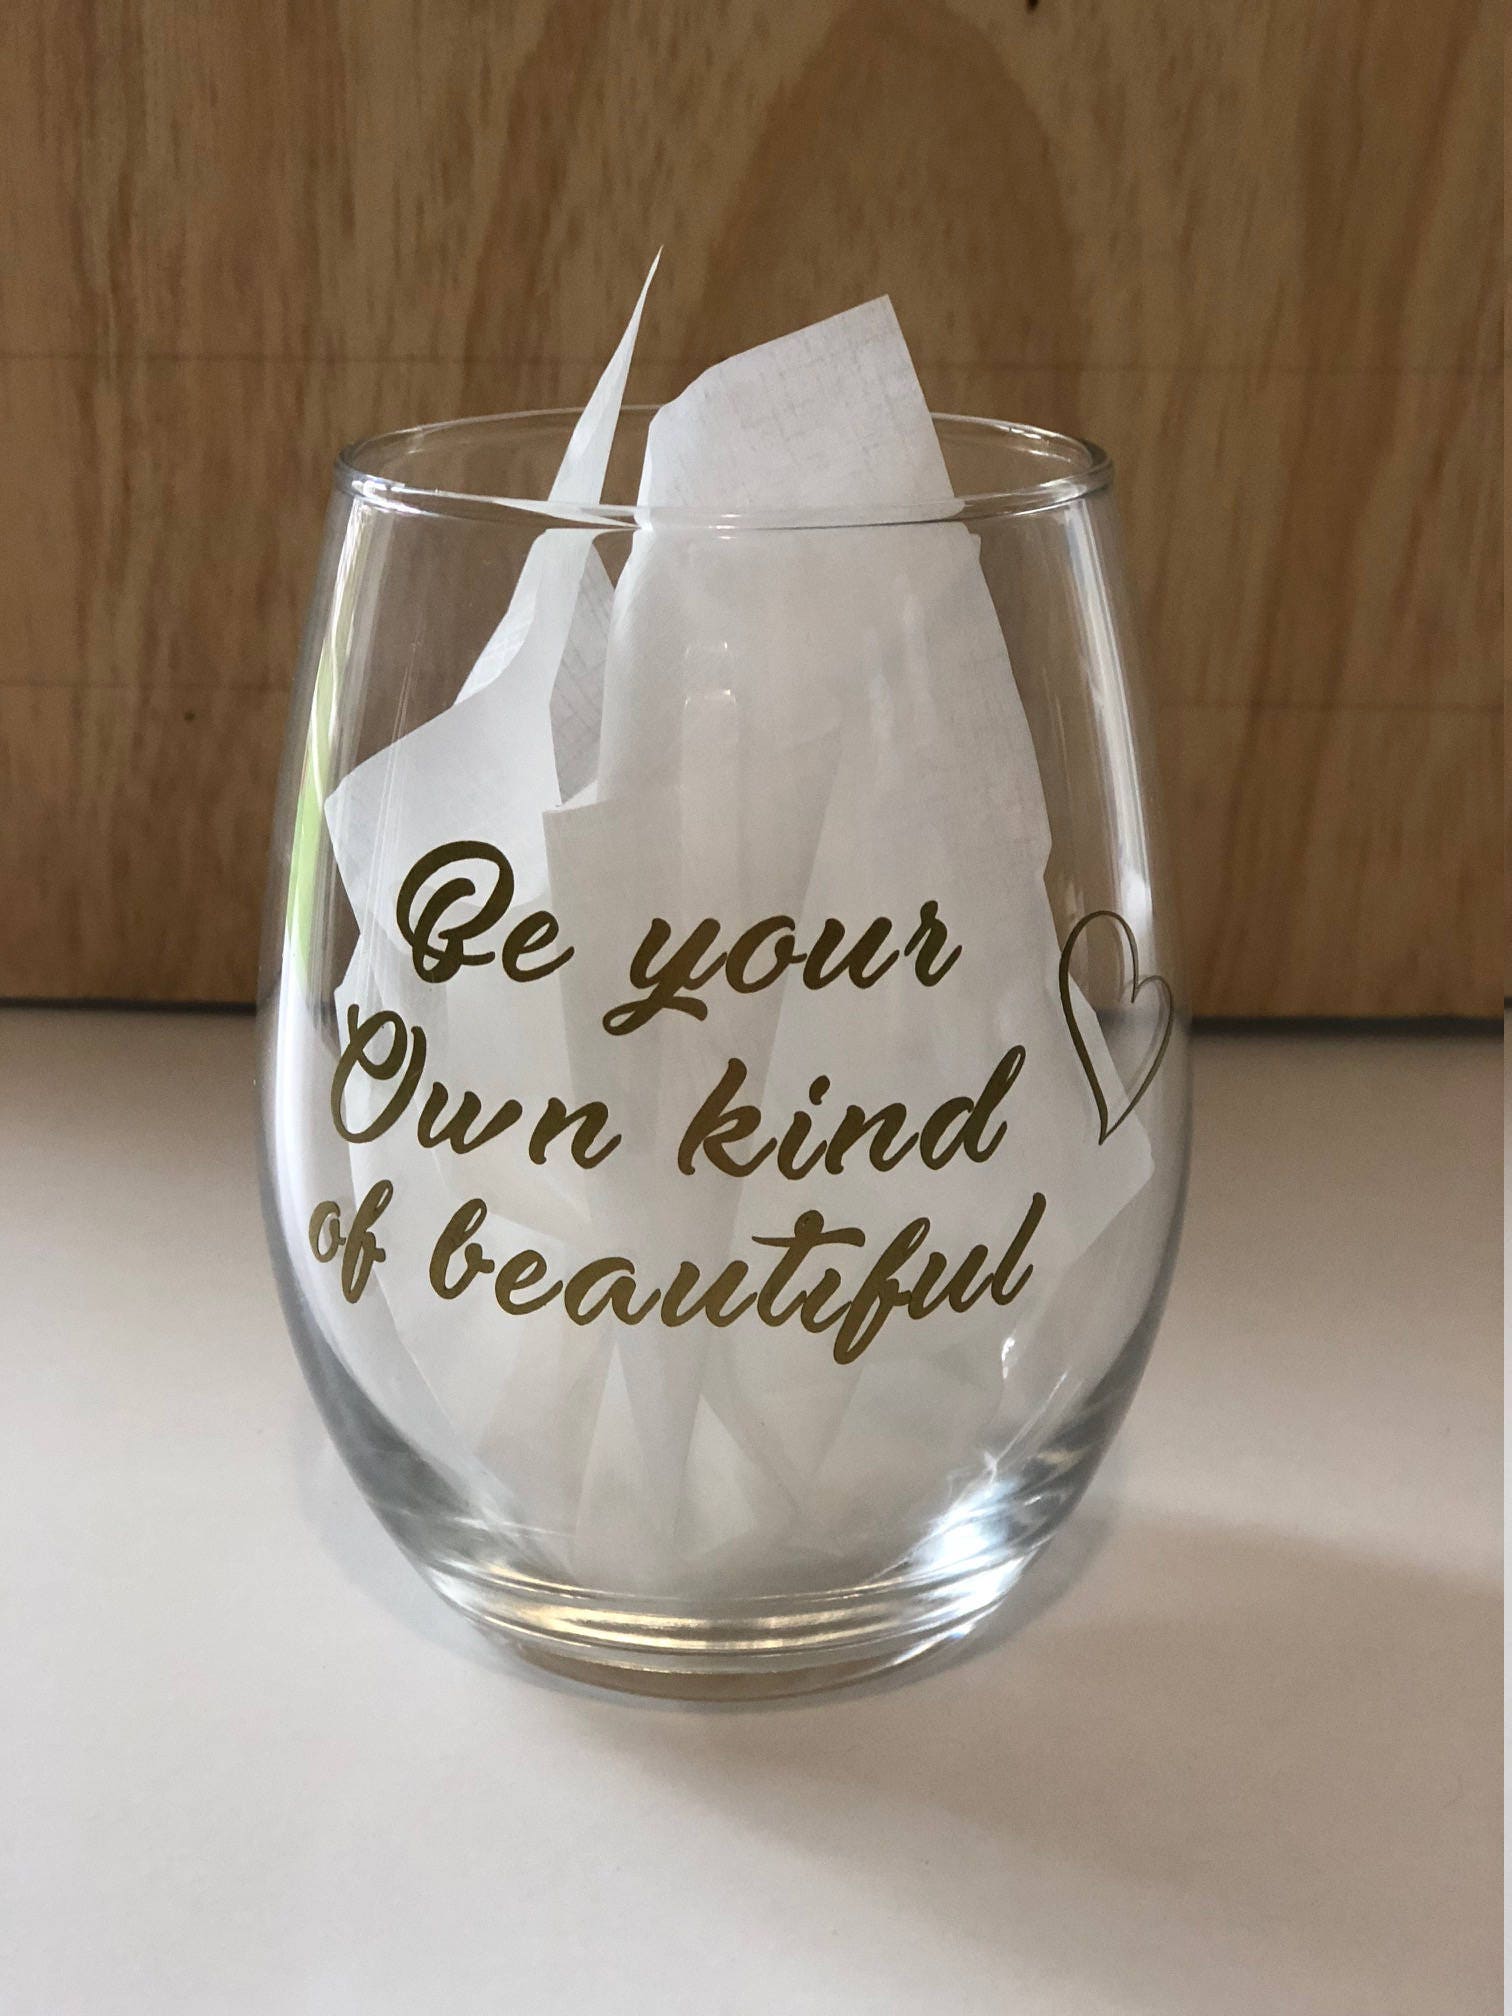 Decorate Stem or Stemless Wine Glasses with a Vinyl Cutter